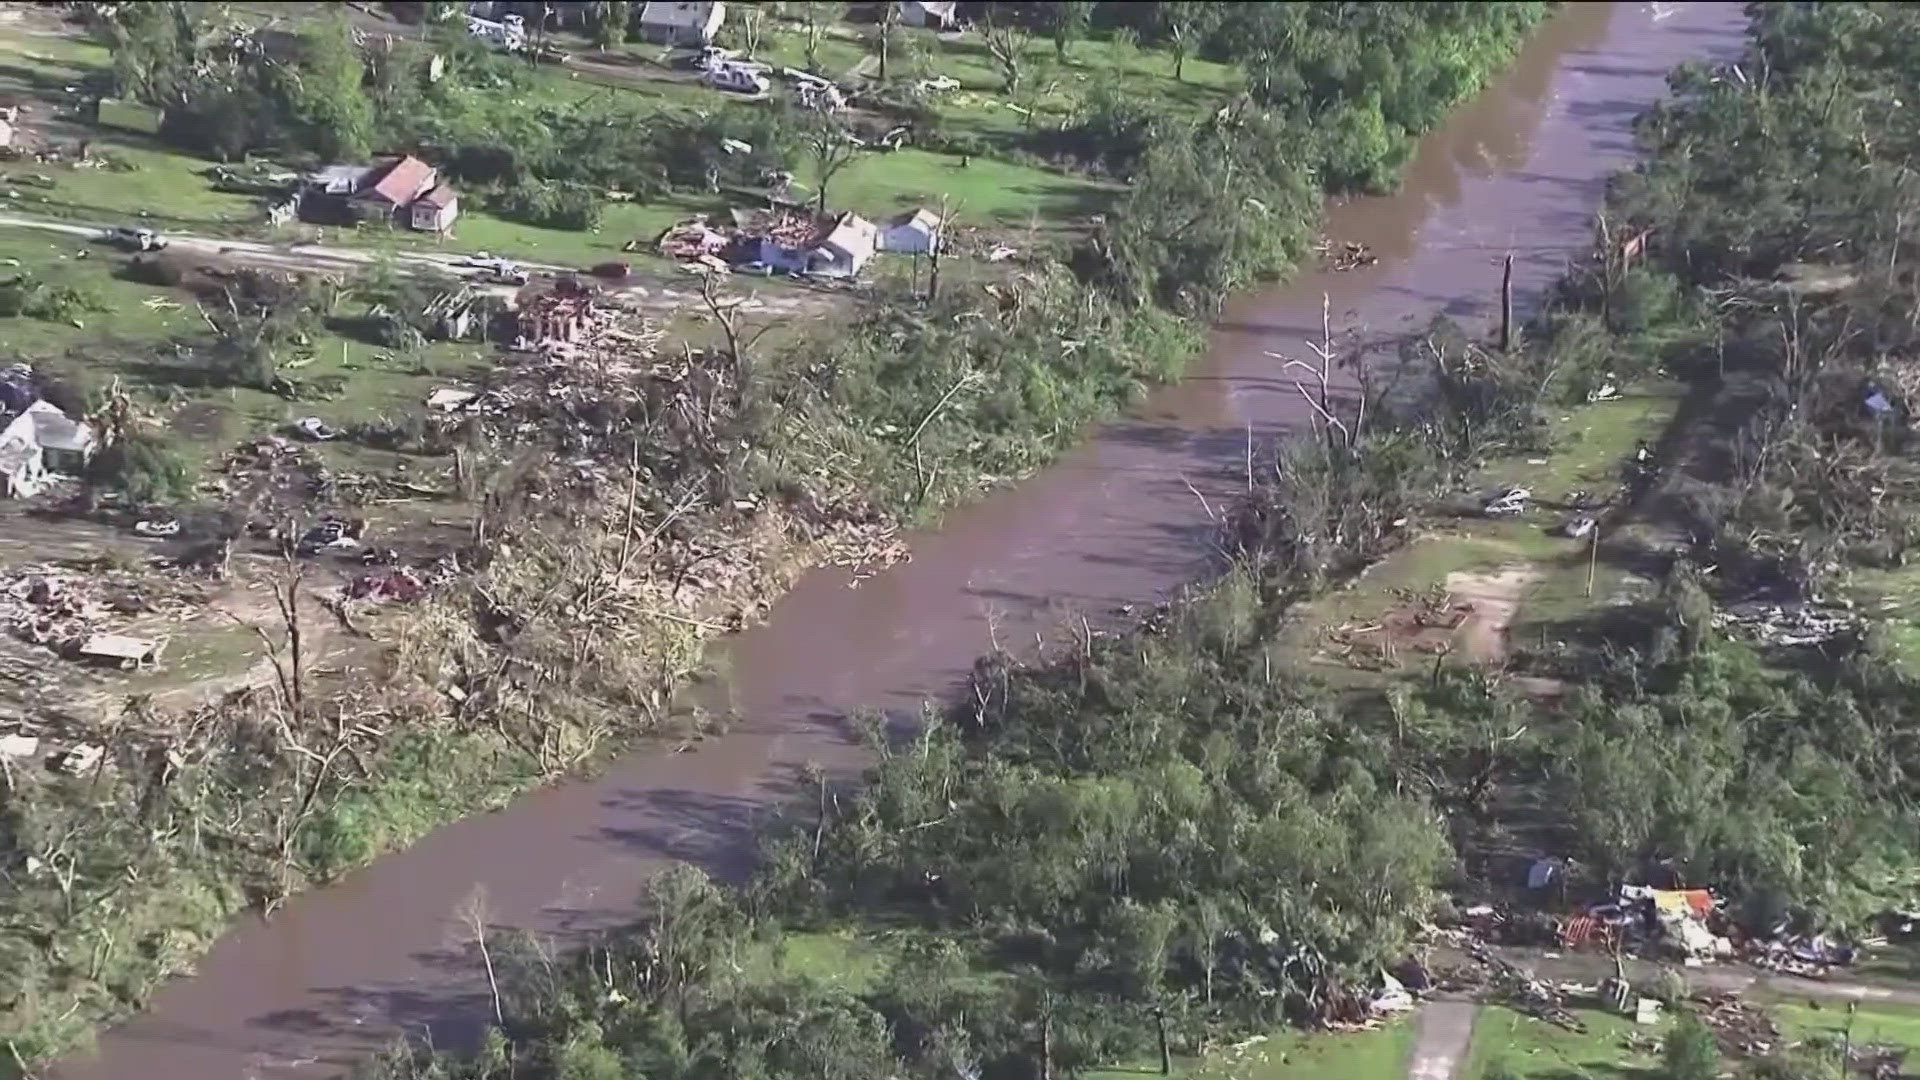 Daylight is revealing the destructive path of a tornado that tore through parts of Oklahoma.